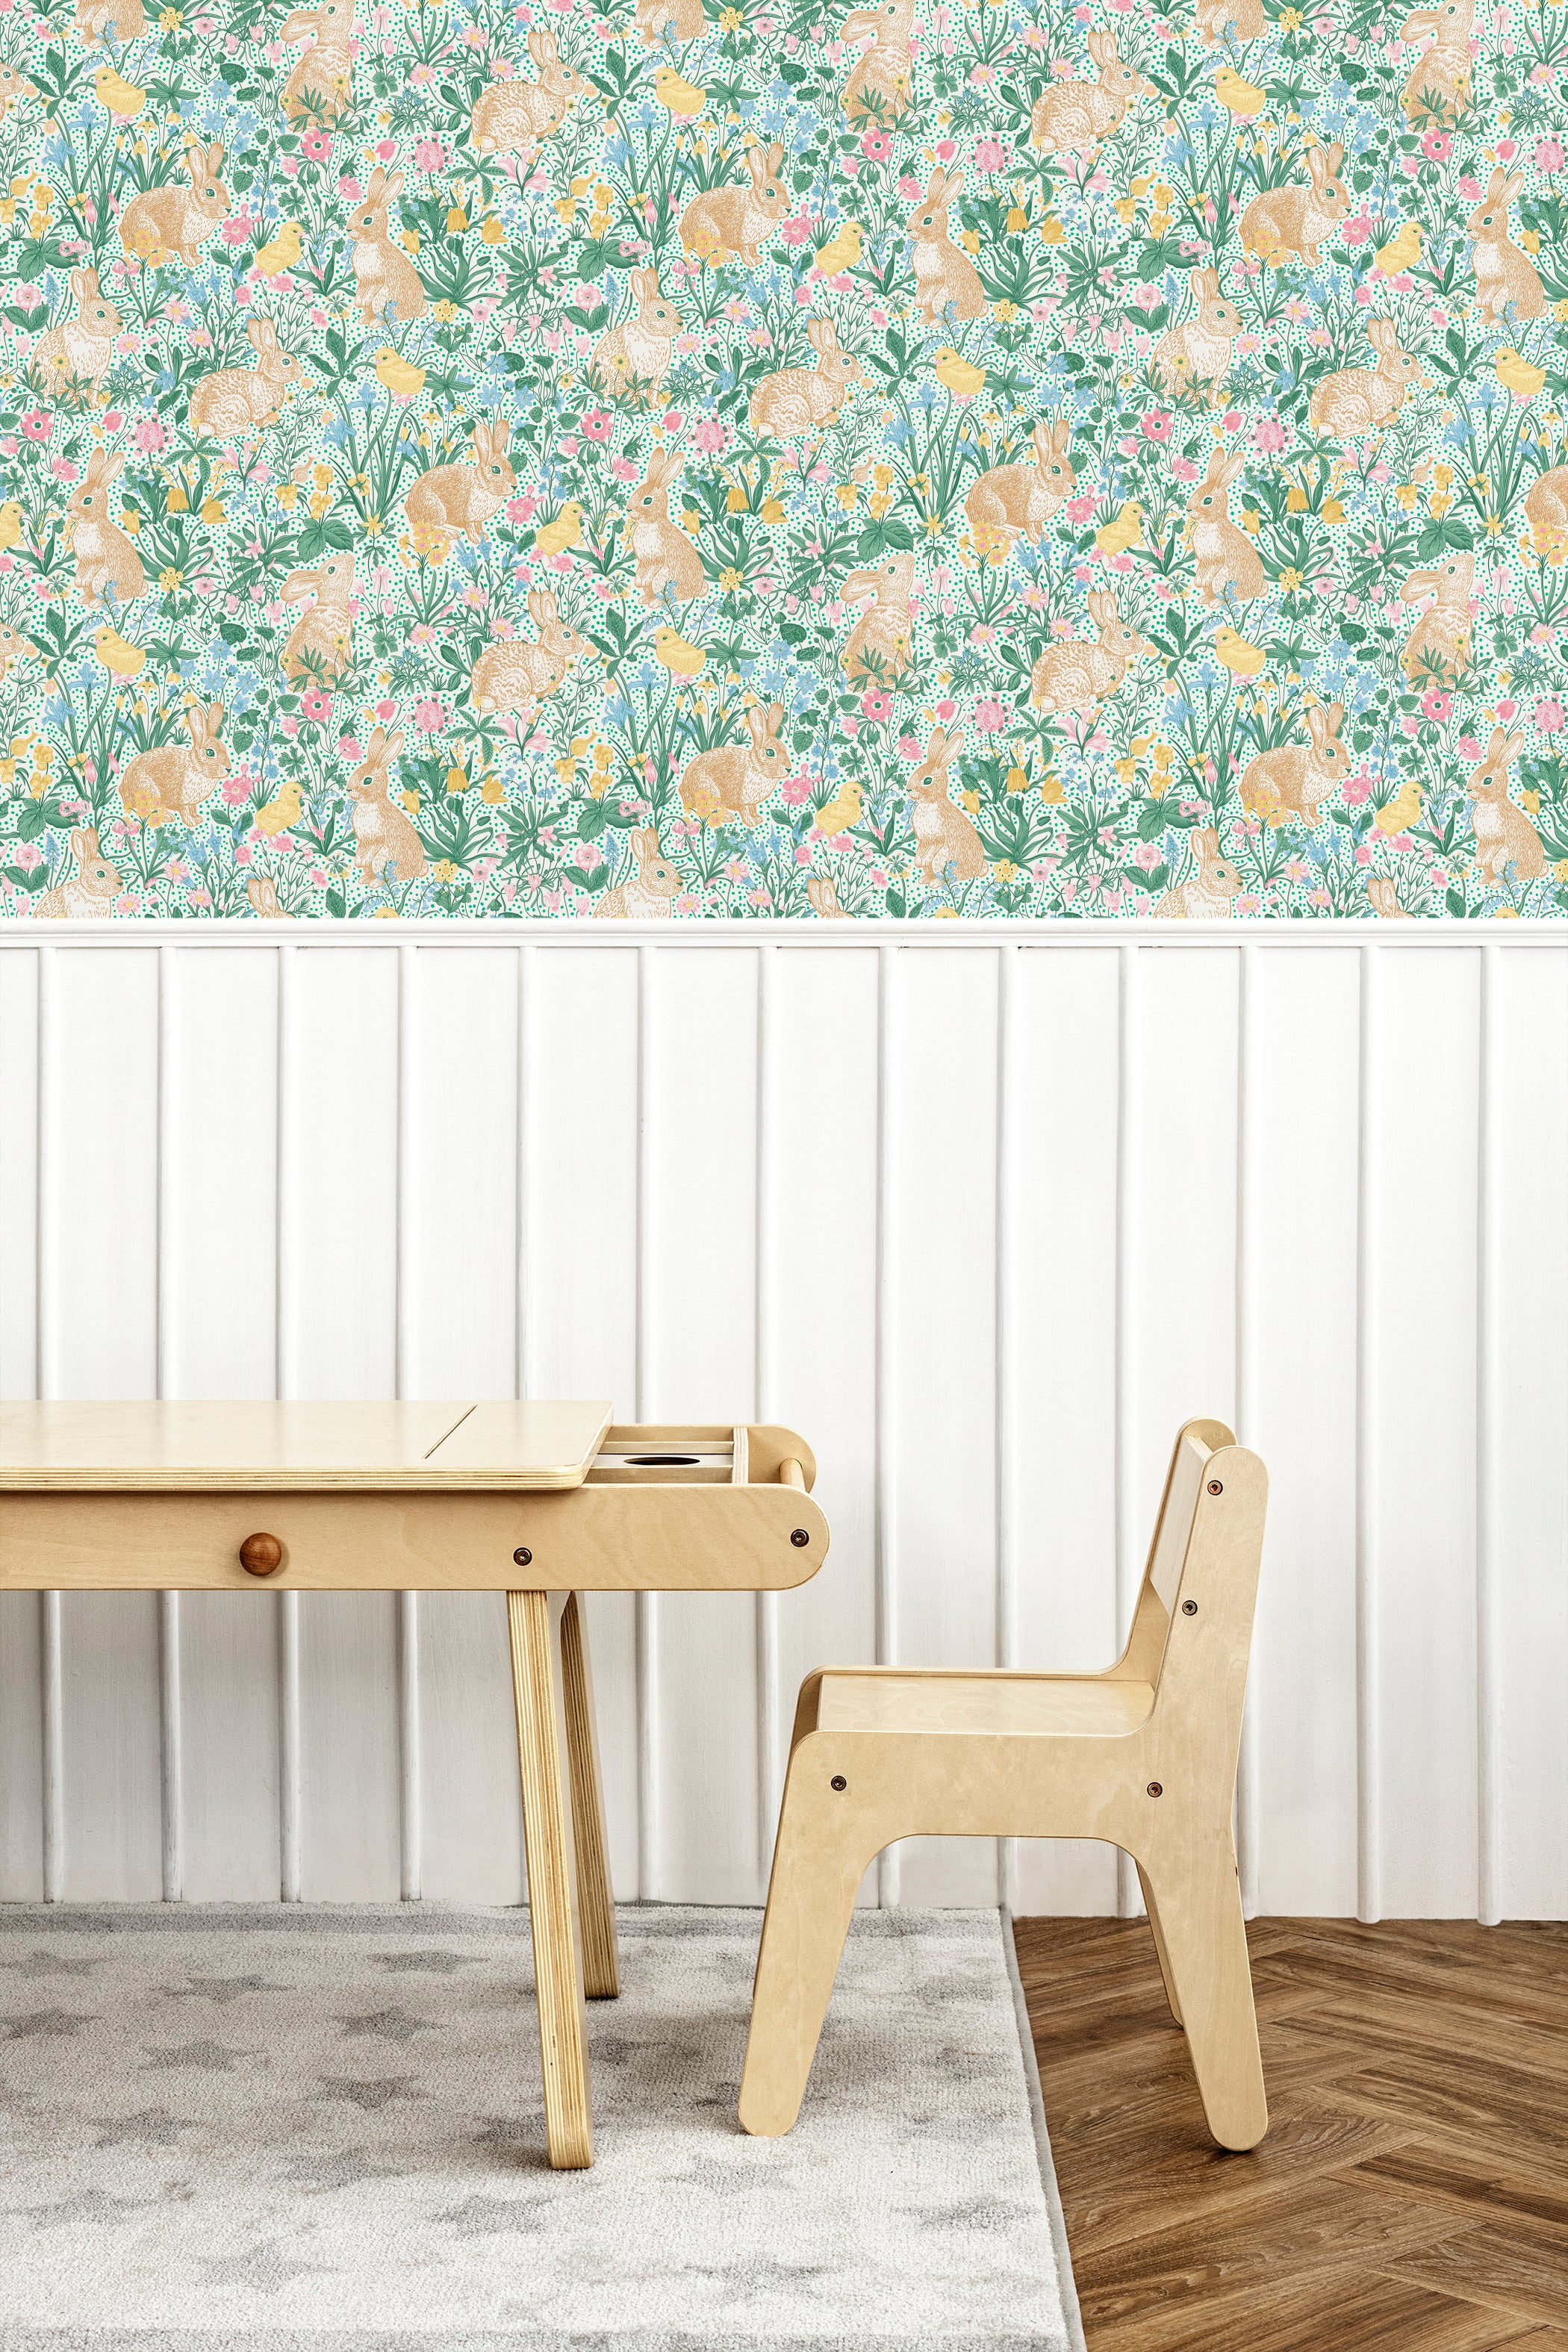 Close-up of a vibrant children's wallpaper depicting a lush, floral scene with rabbits and various spring flowers in soft pastel colors. Positioned beside a simple wooden desk and chair set, enhancing a calm study environment.